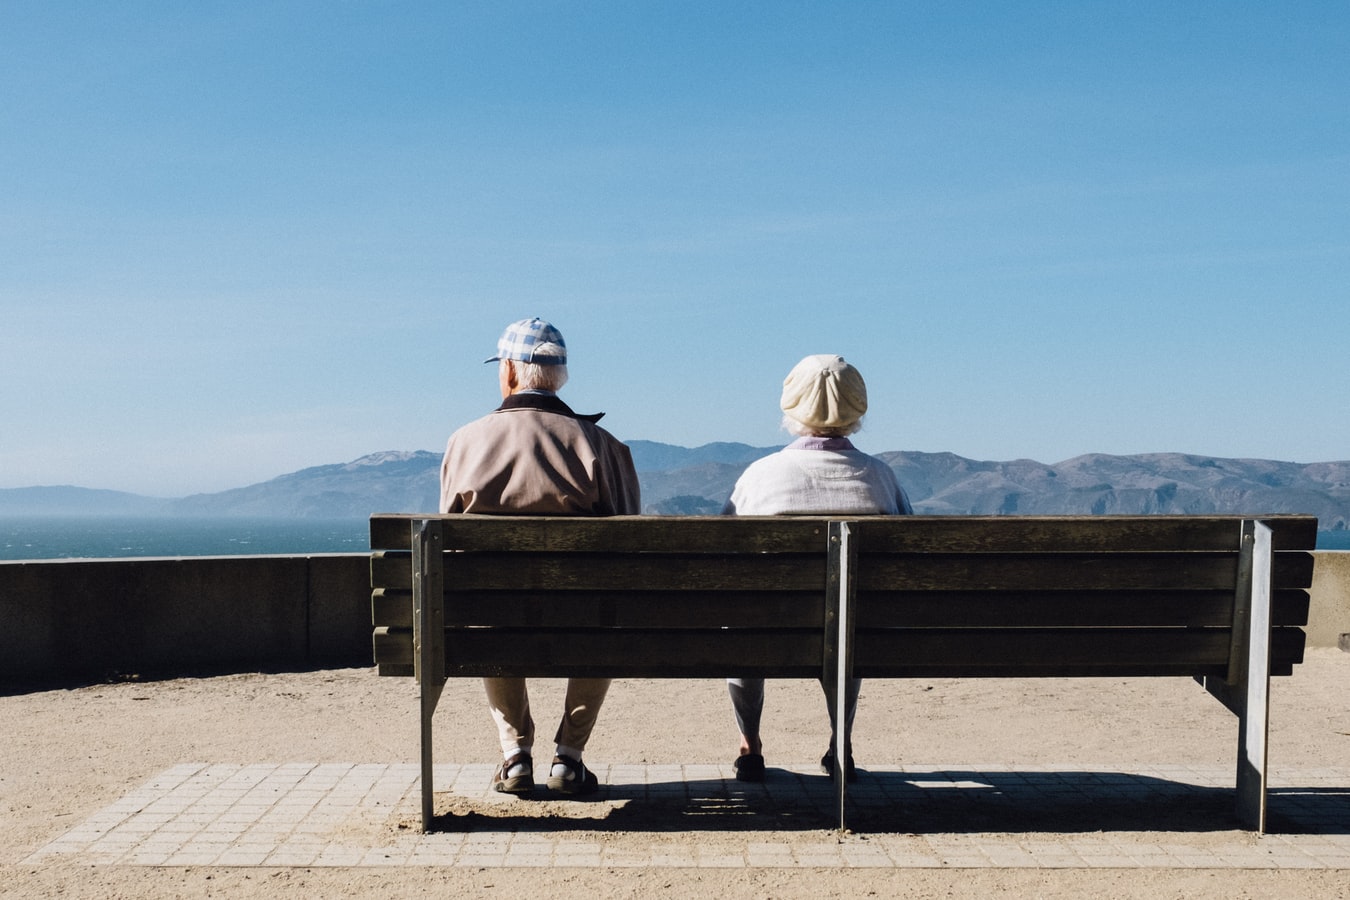 An elderly man and woman sitting on a bench overlooking  mountains